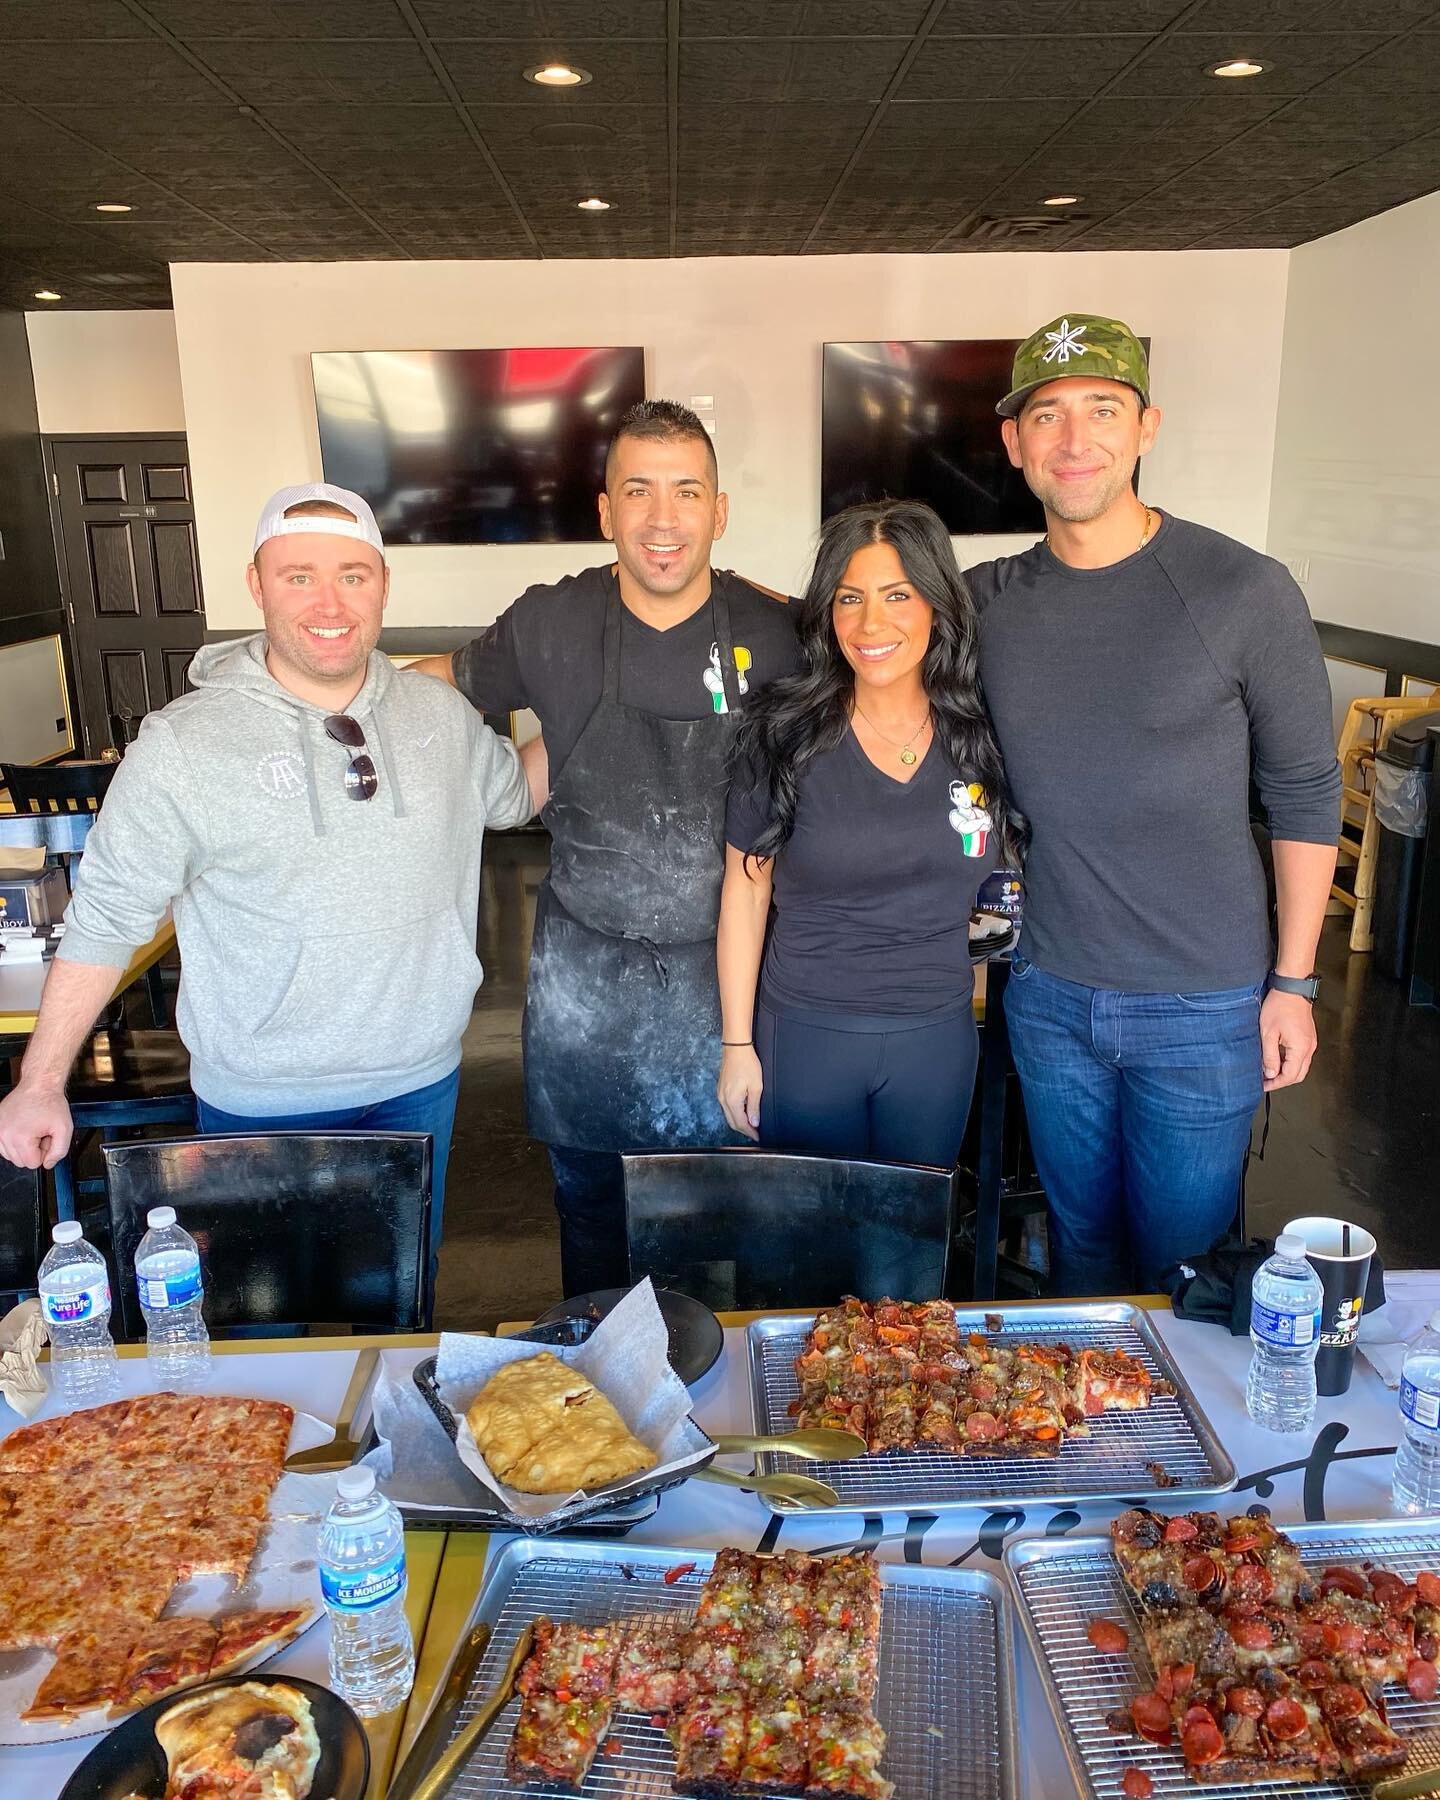 @cristina_bertolli and i Had a blast cooking up with @primadante @whitesoxdave @tommyleighjr @barstoolchicago  during the day and got to see my guy @nickysmigs at nite crackin us up per usual!!!! 

-
-
 ⭐️⭐️⭐️💚🤍❤️⭐️⭐️⭐️
 @pizzaboychicago 

 🍕👦🏻?